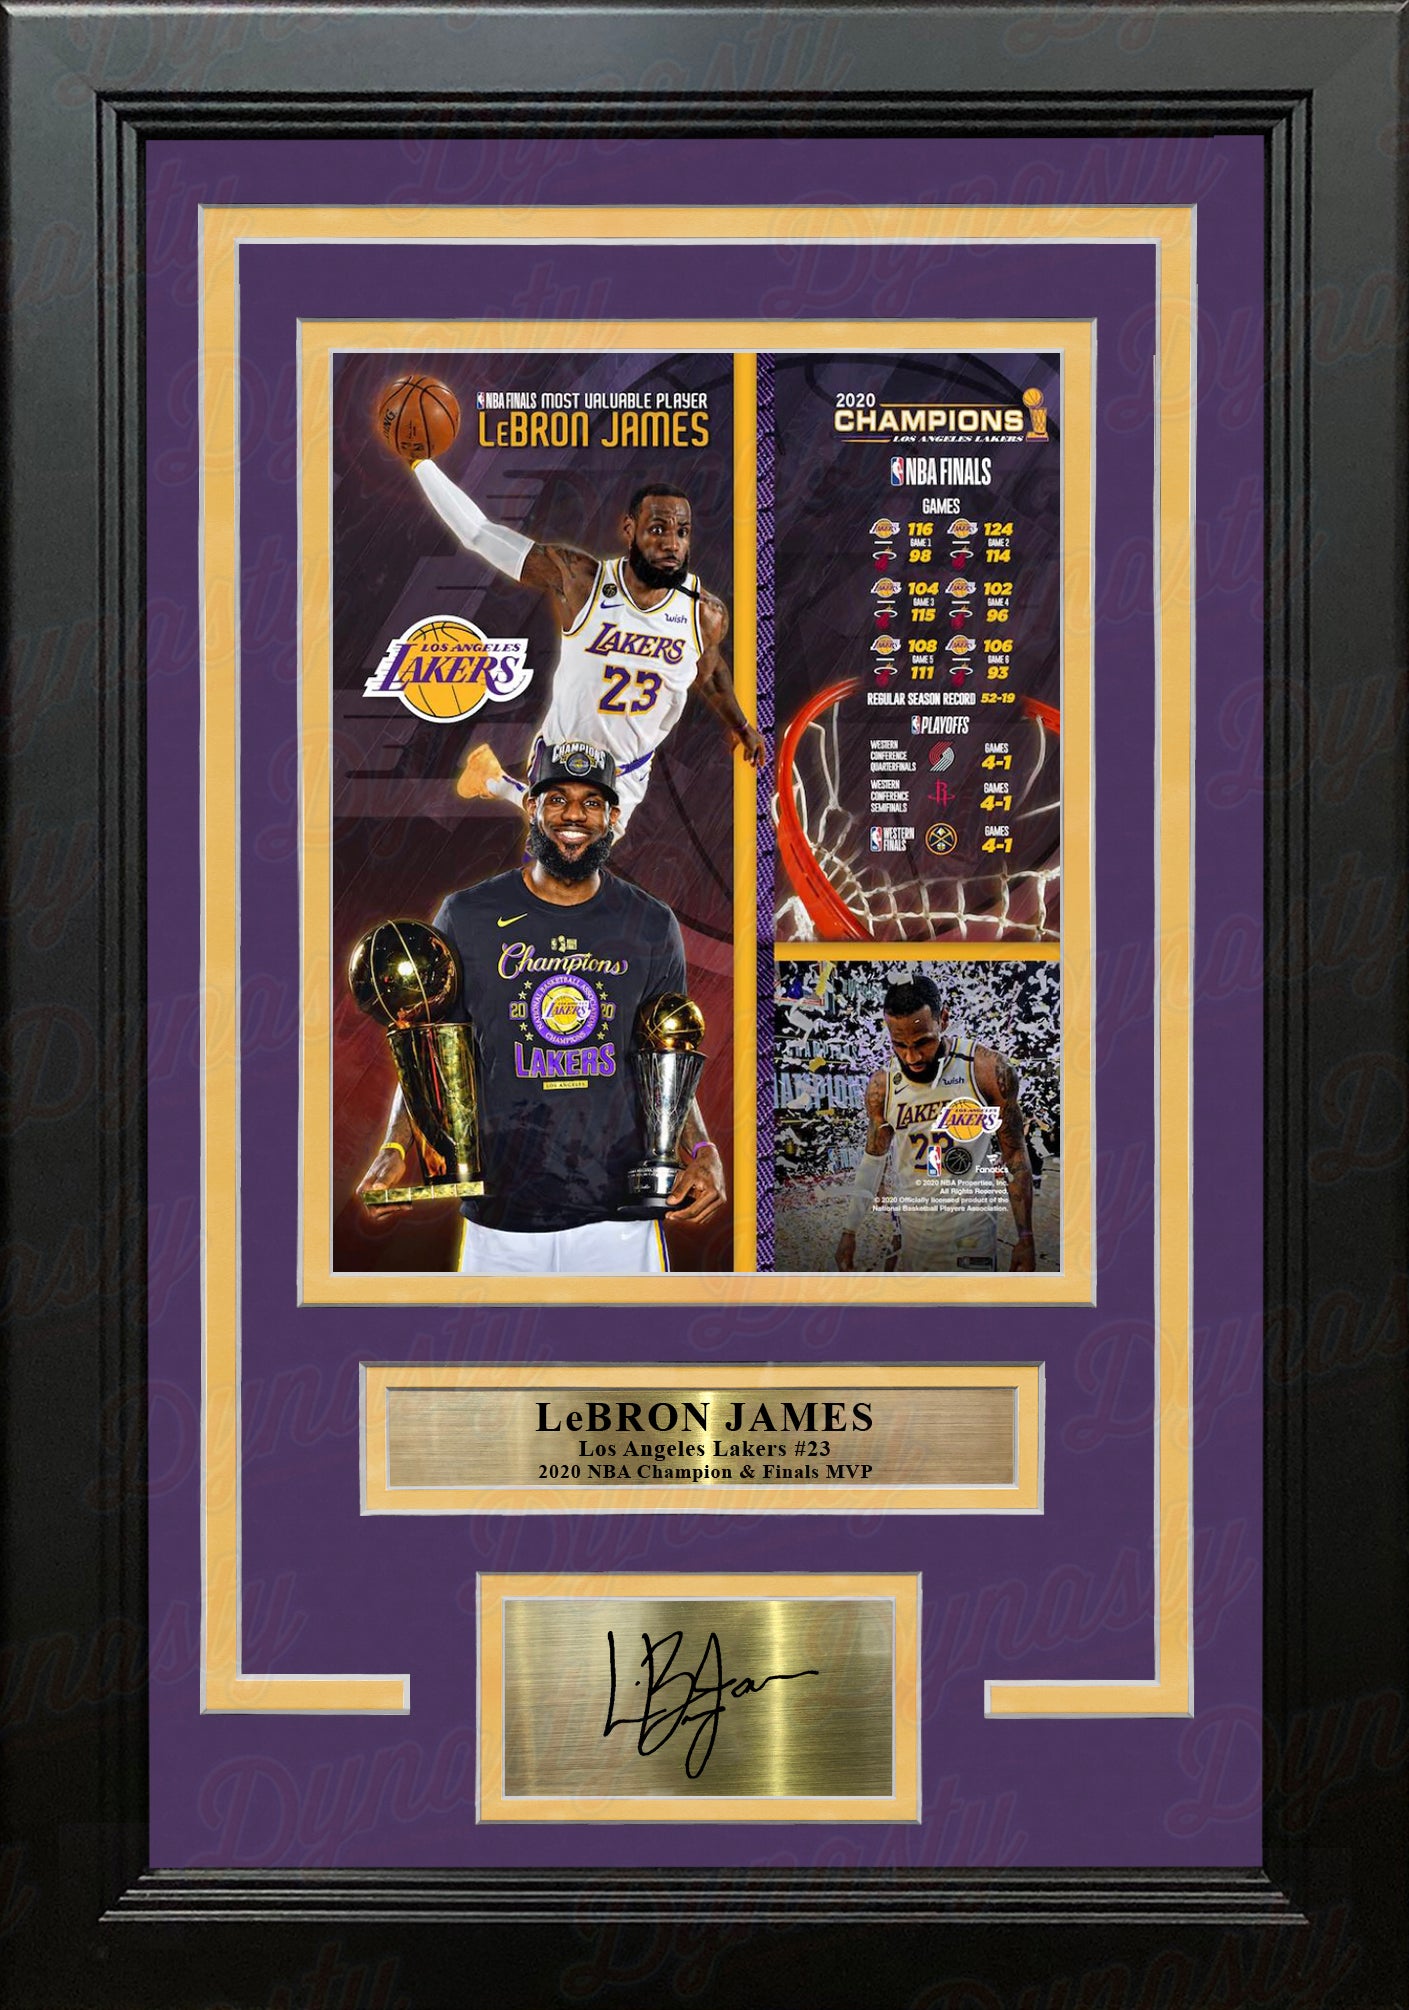 MVP Black or White LeBron James Los Angeles La Lakers Signed Autographed Photo Photograph Picture Frame Basketball Poster Gift (Off White Mount)